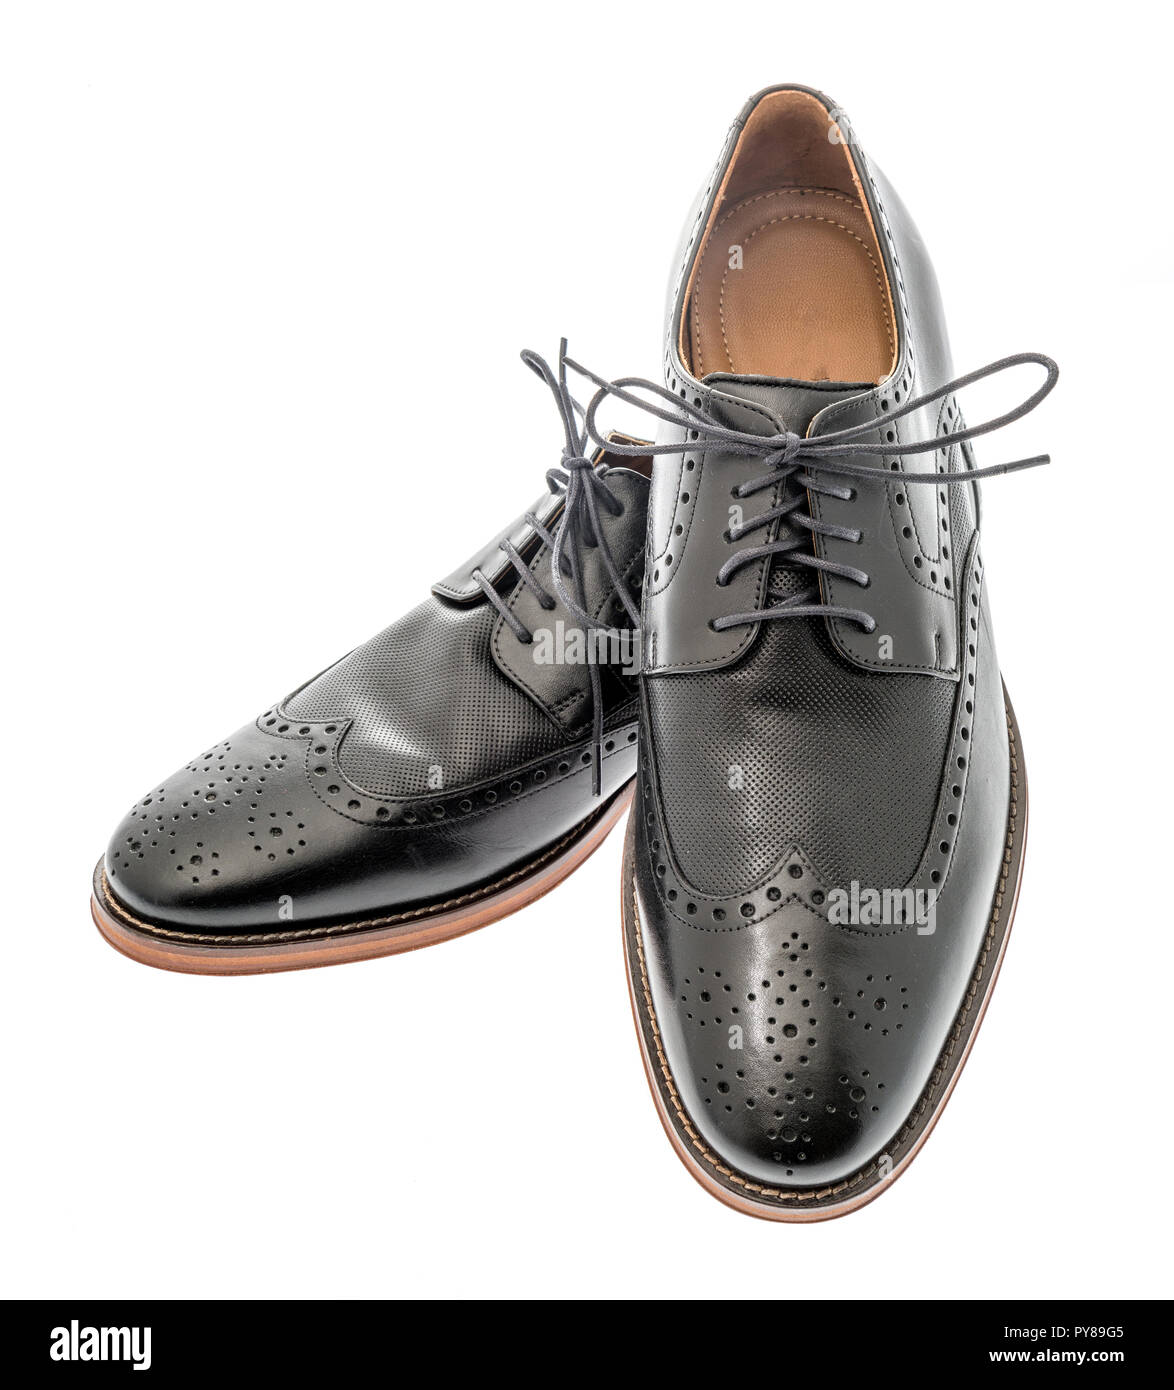 A pair of mens black wingtip dress shoes on an isolated background Stock Photo